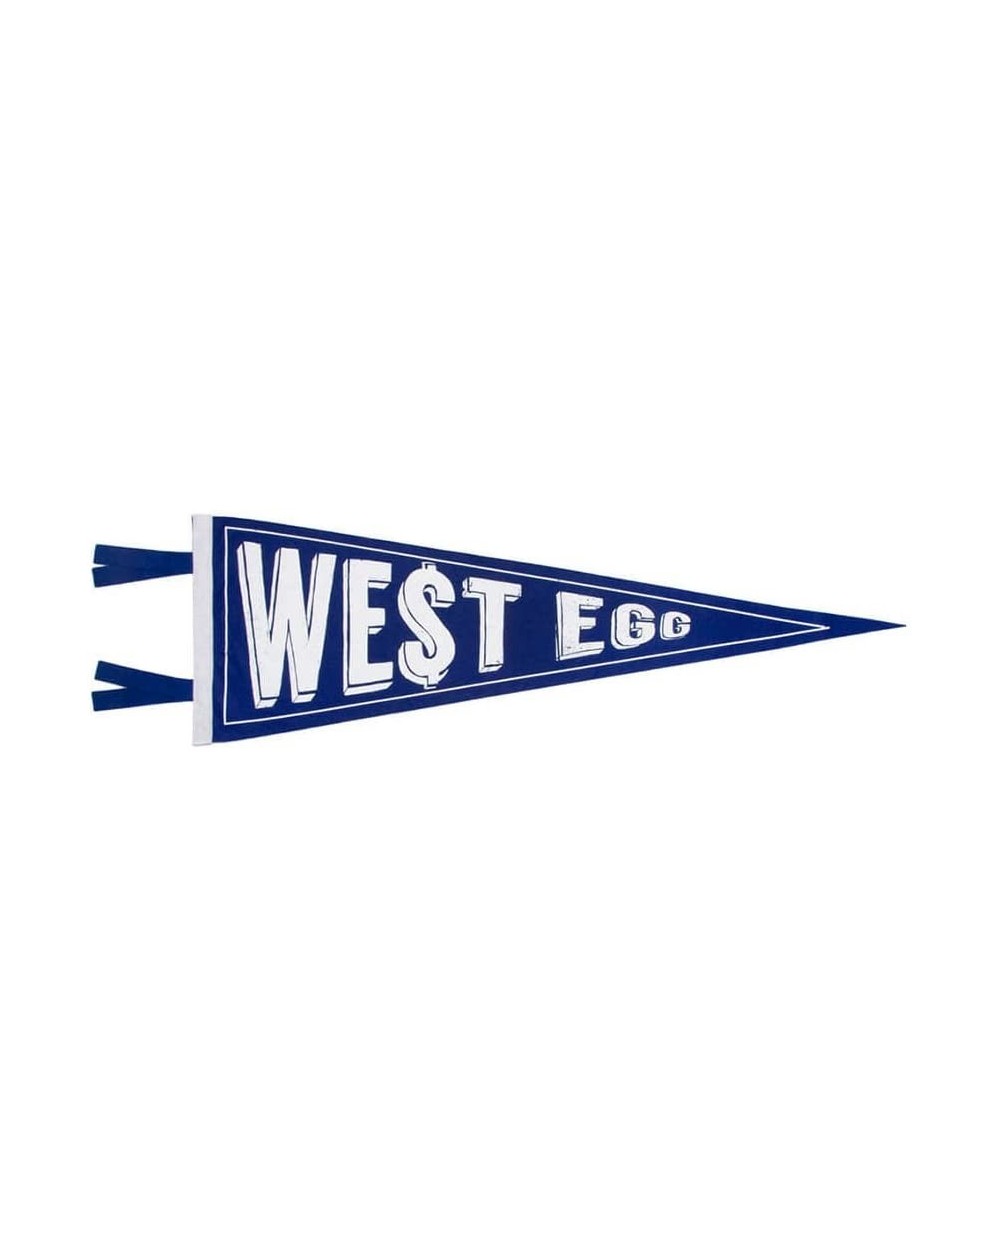 Banners & Garlands West Egg Pennant - West Egg - CT12C99L8QB $15.05